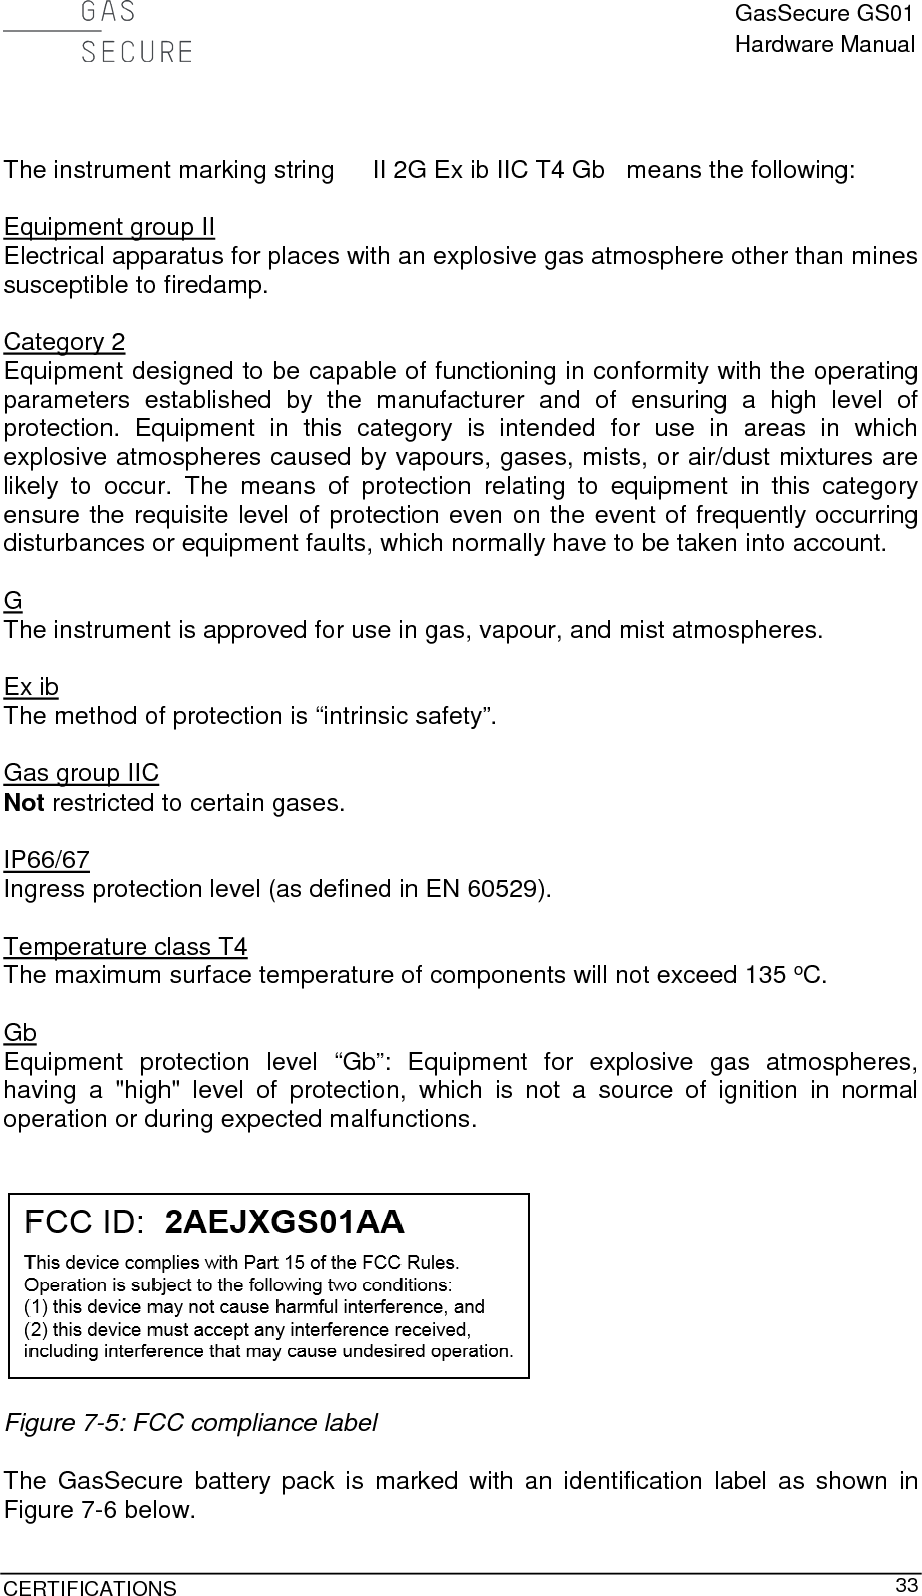  GasSecure GS01 Hardware Manual  CERTIFICATIONS     33   The instrument marking string II 2G Ex ib IIC T4 Gb   means the following:  Equipment group II Electrical apparatus for places with an explosive gas atmosphere other than mines susceptible to firedamp.  Category 2 Equipment designed to be capable of functioning in conformity with the operating parameters established by the manufacturer and of ensuring a high level of protection. Equipment in this category is intended for use in areas in which explosive atmospheres caused by vapours, gases, mists, or air/dust mixtures are likely to occur. The means of protection relating to equipment in this category ensure the requisite level of protection even on the event of frequently occurring disturbances or equipment faults, which normally have to be taken into account.   G The instrument is approved for use in gas, vapour, and mist atmospheres.  Ex ib The method of protection is “intrinsic safety”.  Gas group IIC  Not restricted to certain gases.  IP66/67 Ingress protection level (as defined in EN 60529).  Temperature class T4 The maximum surface temperature of components will not exceed 135 oC.  Gb Equipment protection level “Gb”: Equipment for explosive gas atmospheres, having a &quot;high&quot; level of protection, which is not a source of ignition in normal operation or during expected malfunctions.     Figure 7-5: FCC compliance label  The GasSecure battery pack is marked with an identification label as shown in Figure 7-6 below. 